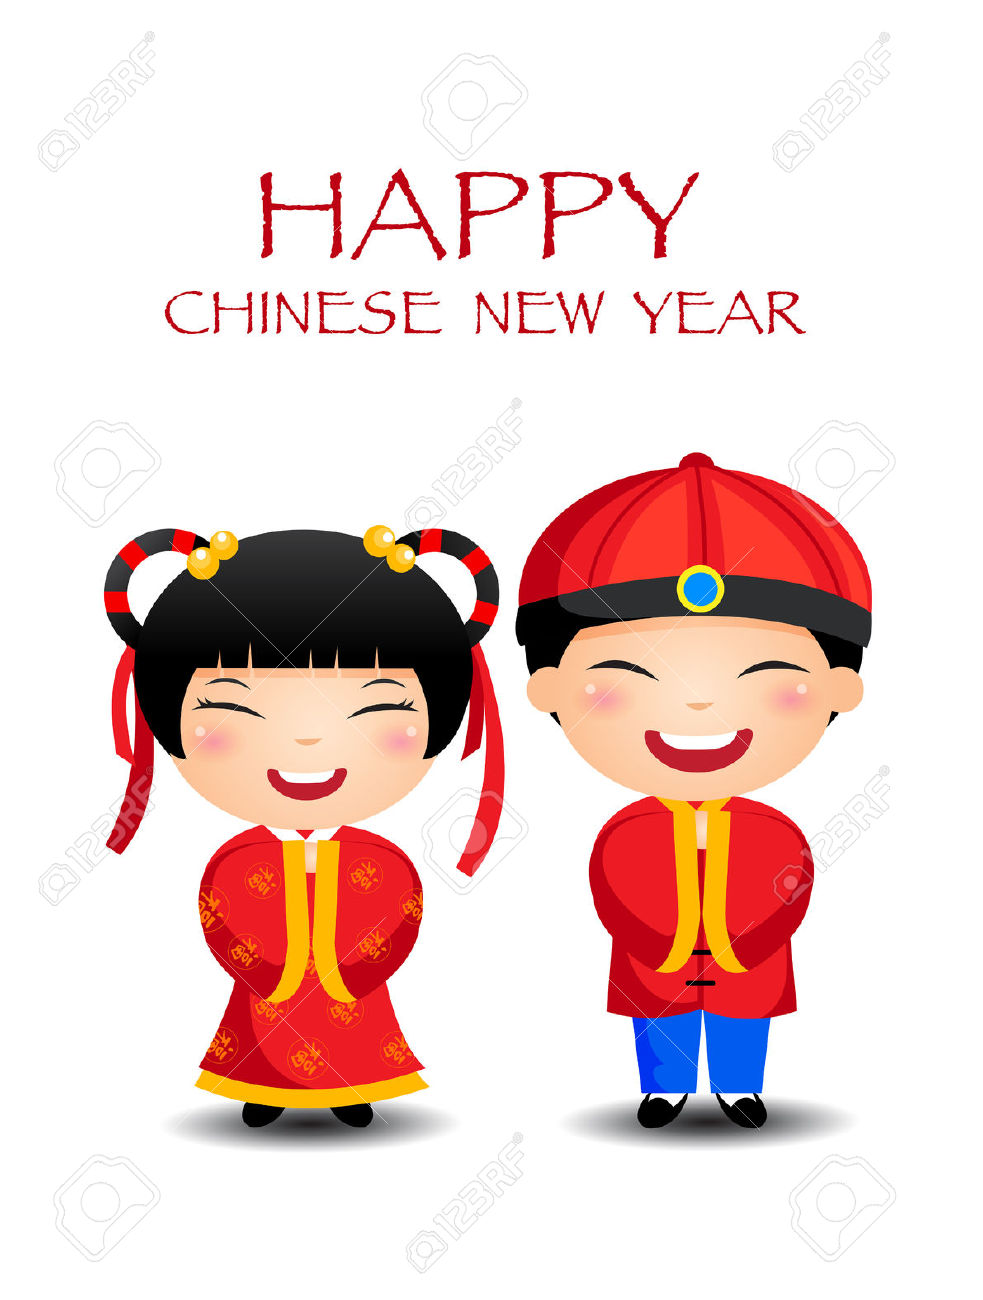 happy chinese new year 2014 clipart free - photo #10